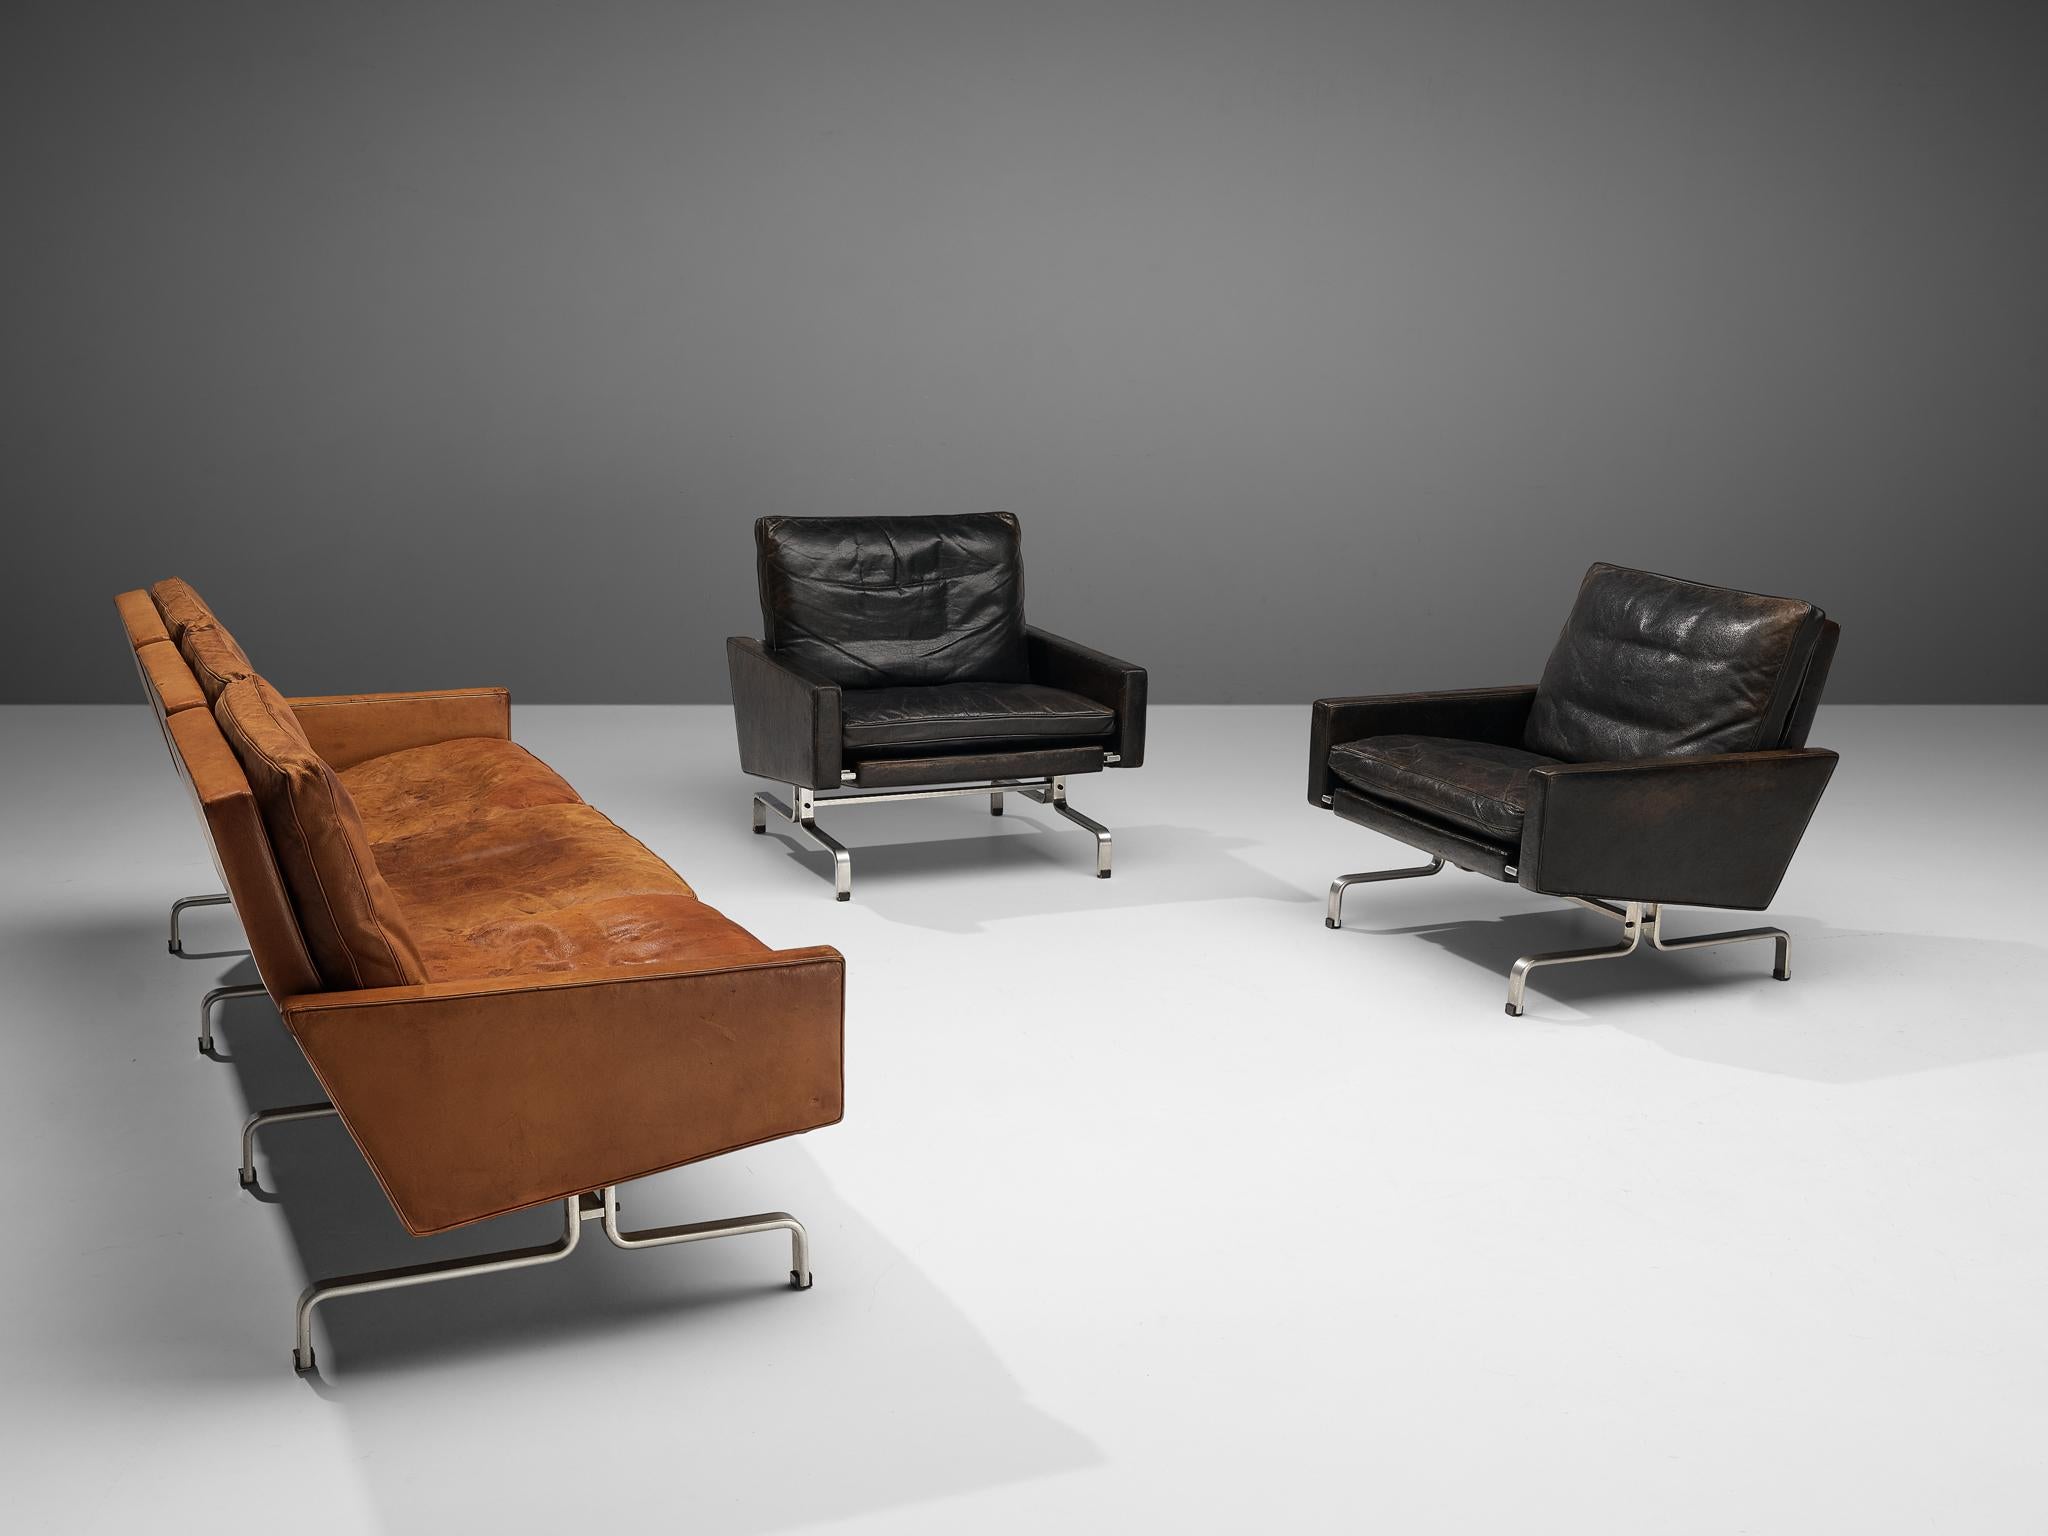 Set of Poul Kjaerholm 'PK31-1' Lounge Chairs and PK31 Sofa in Leather 1